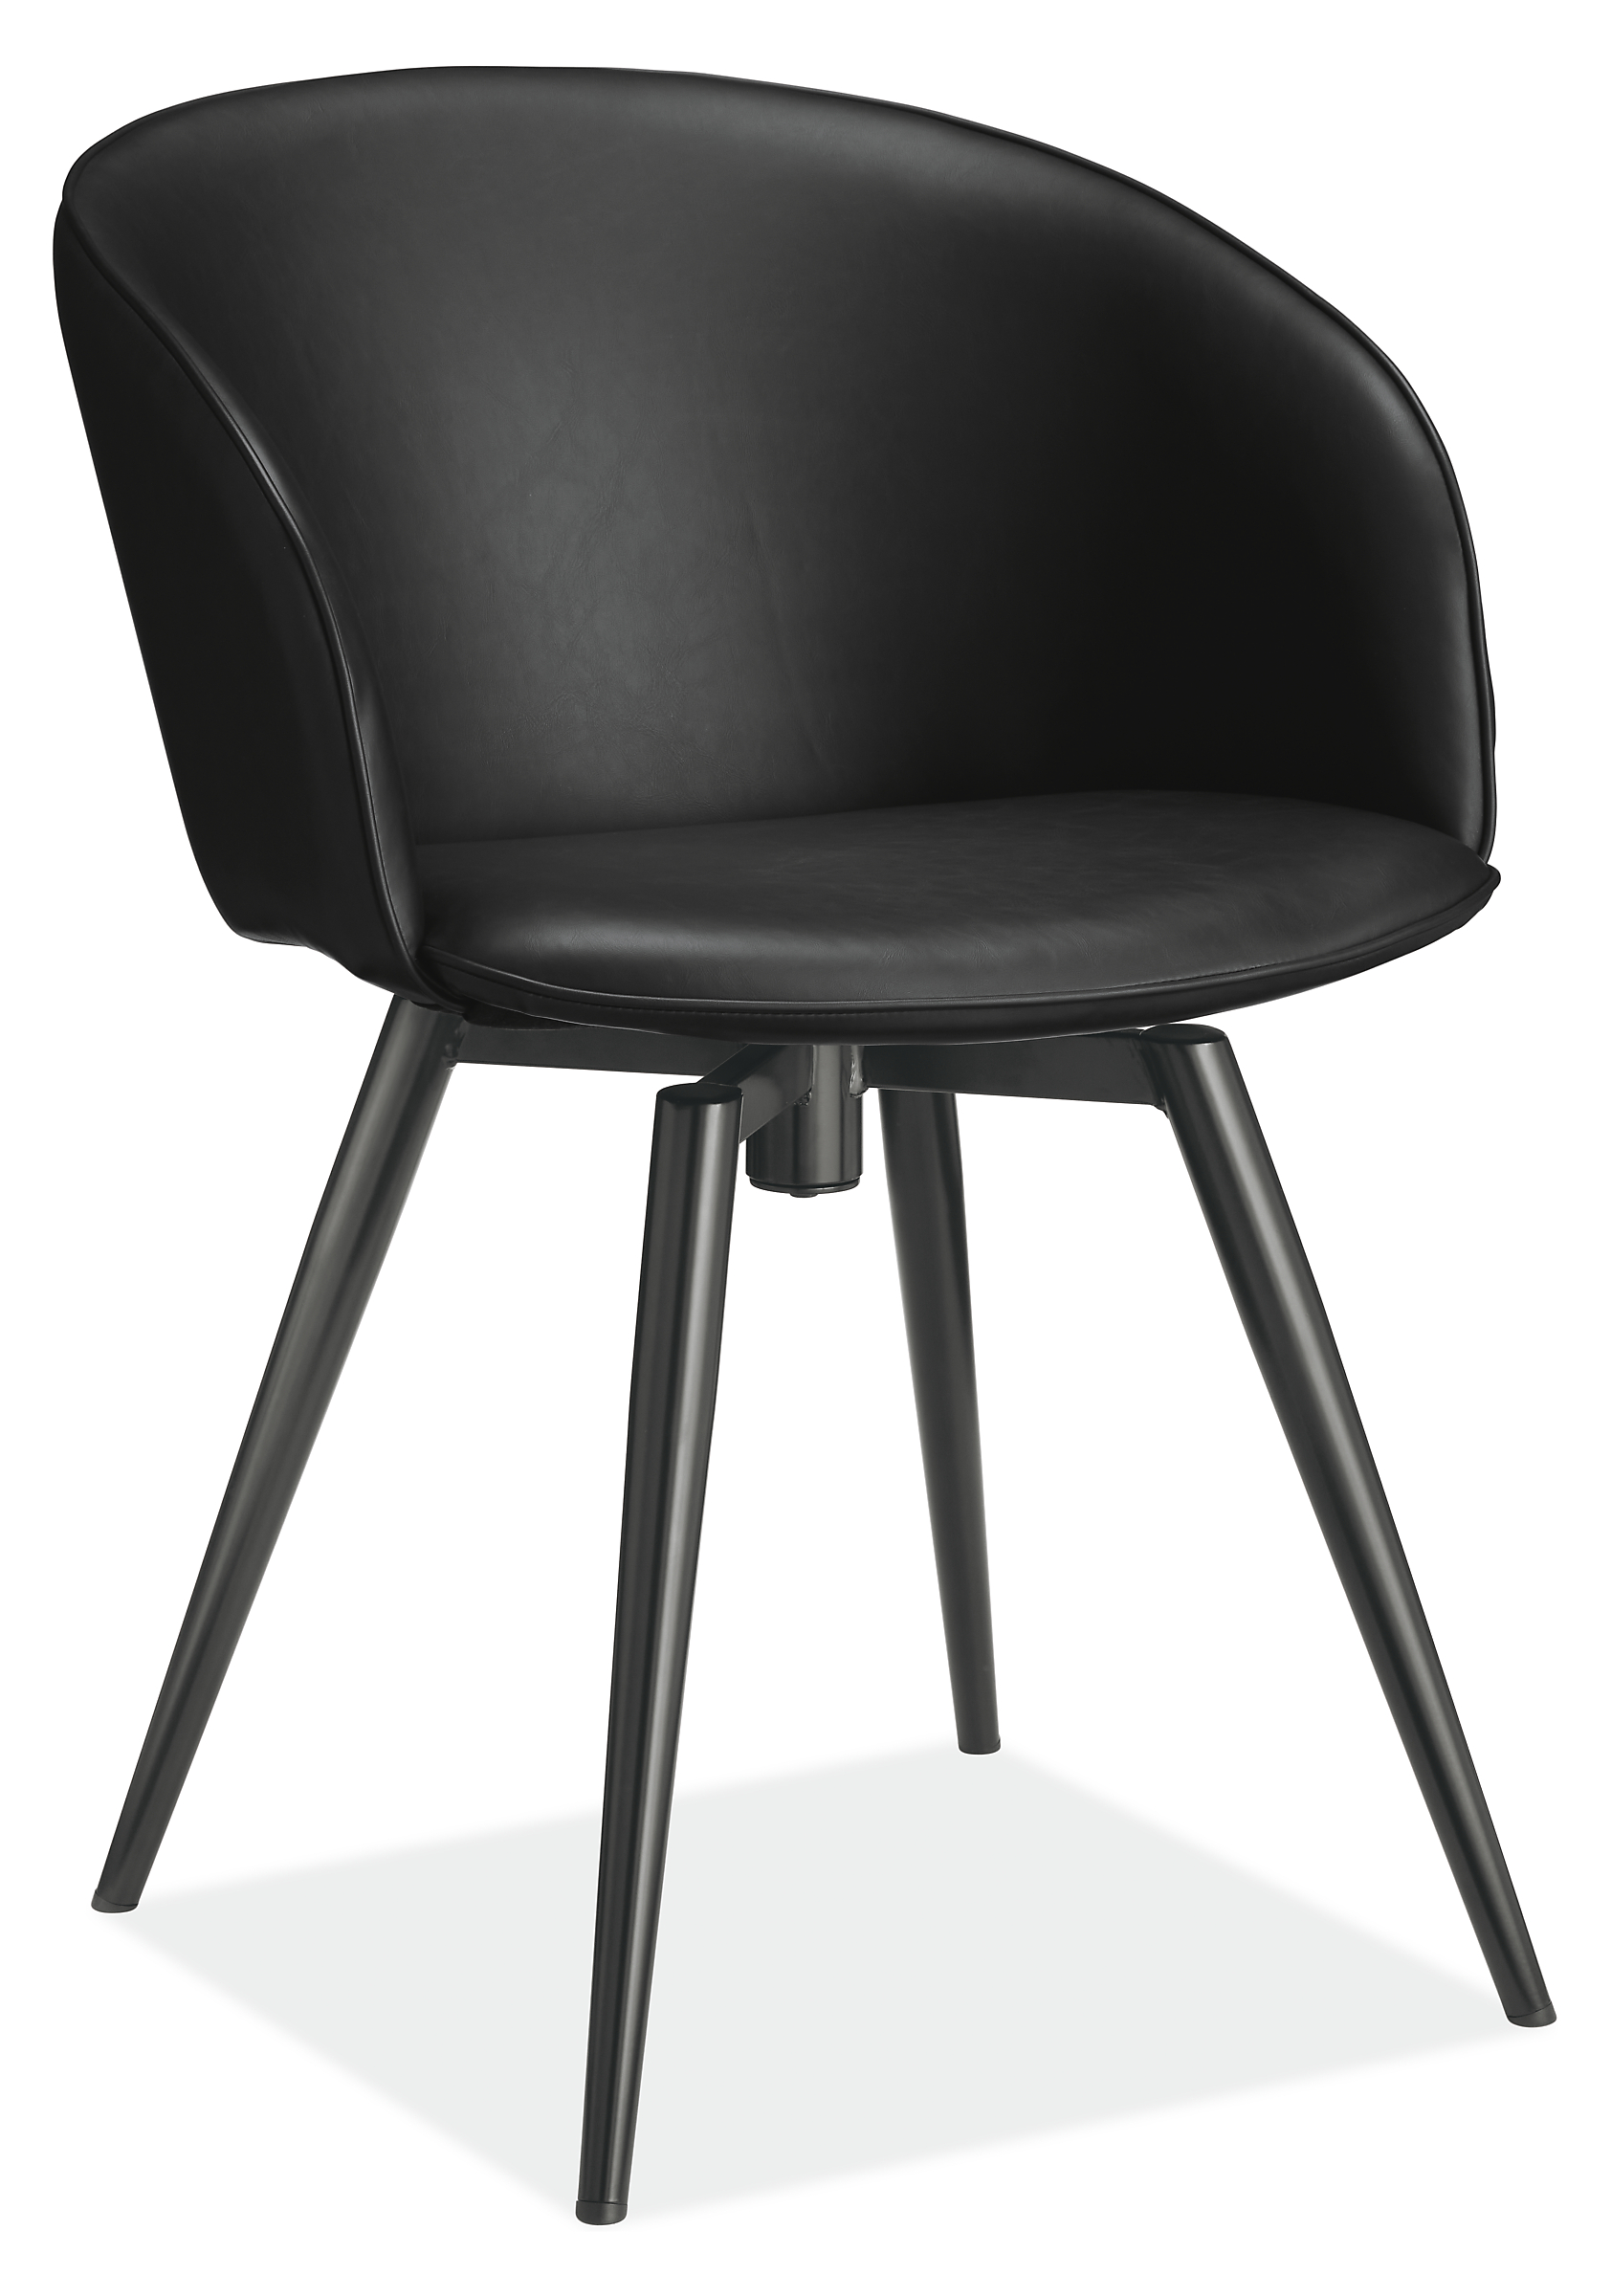 Sylvan Synthetic Leather Swivel Chair